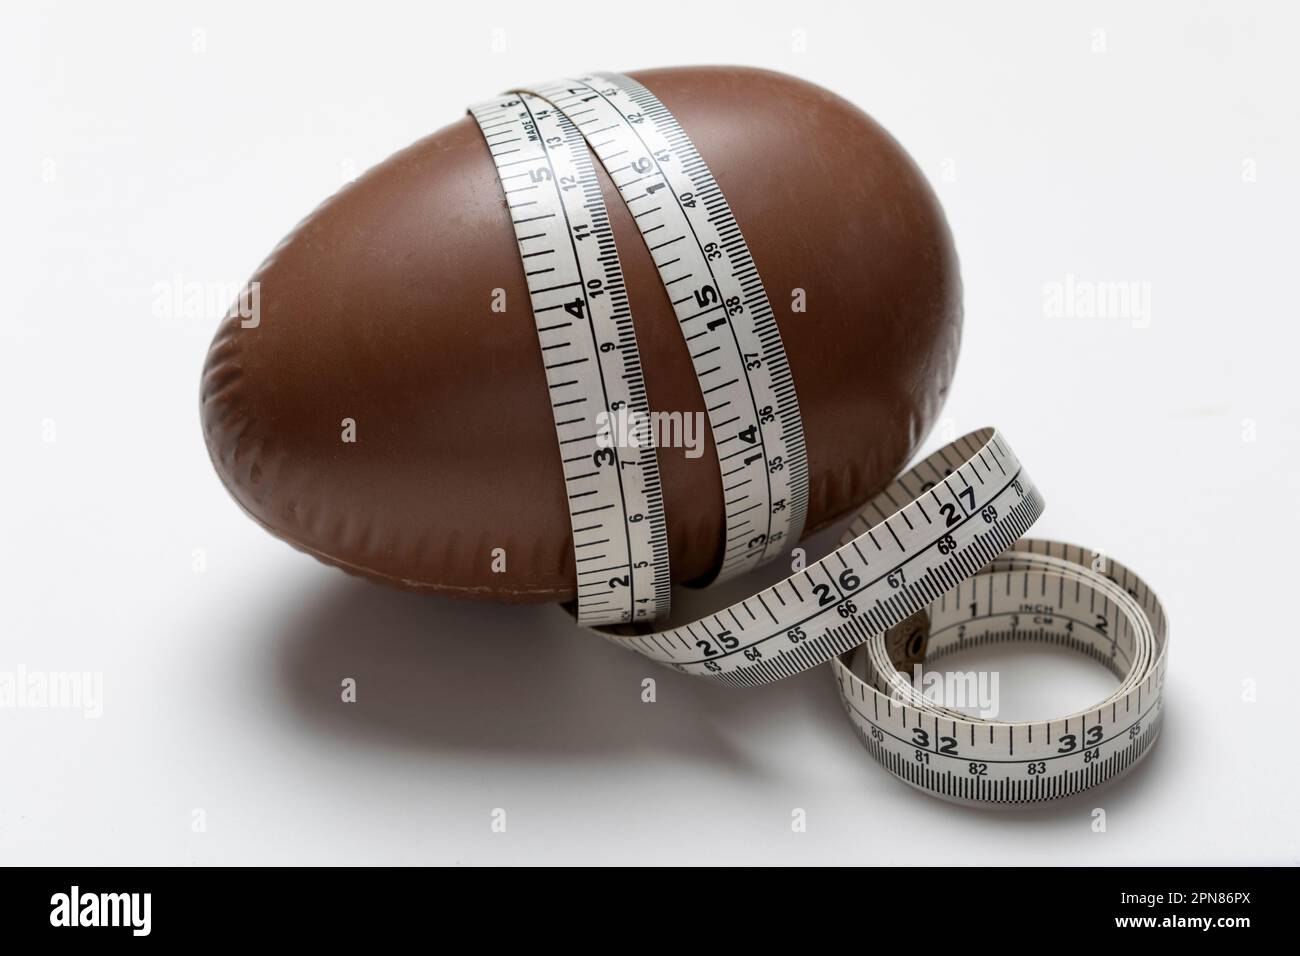 https://c8.alamy.com/comp/2PN86PX/chocolate-easter-egg-with-tape-measure-in-inches-and-cms-2PN86PX.jpg